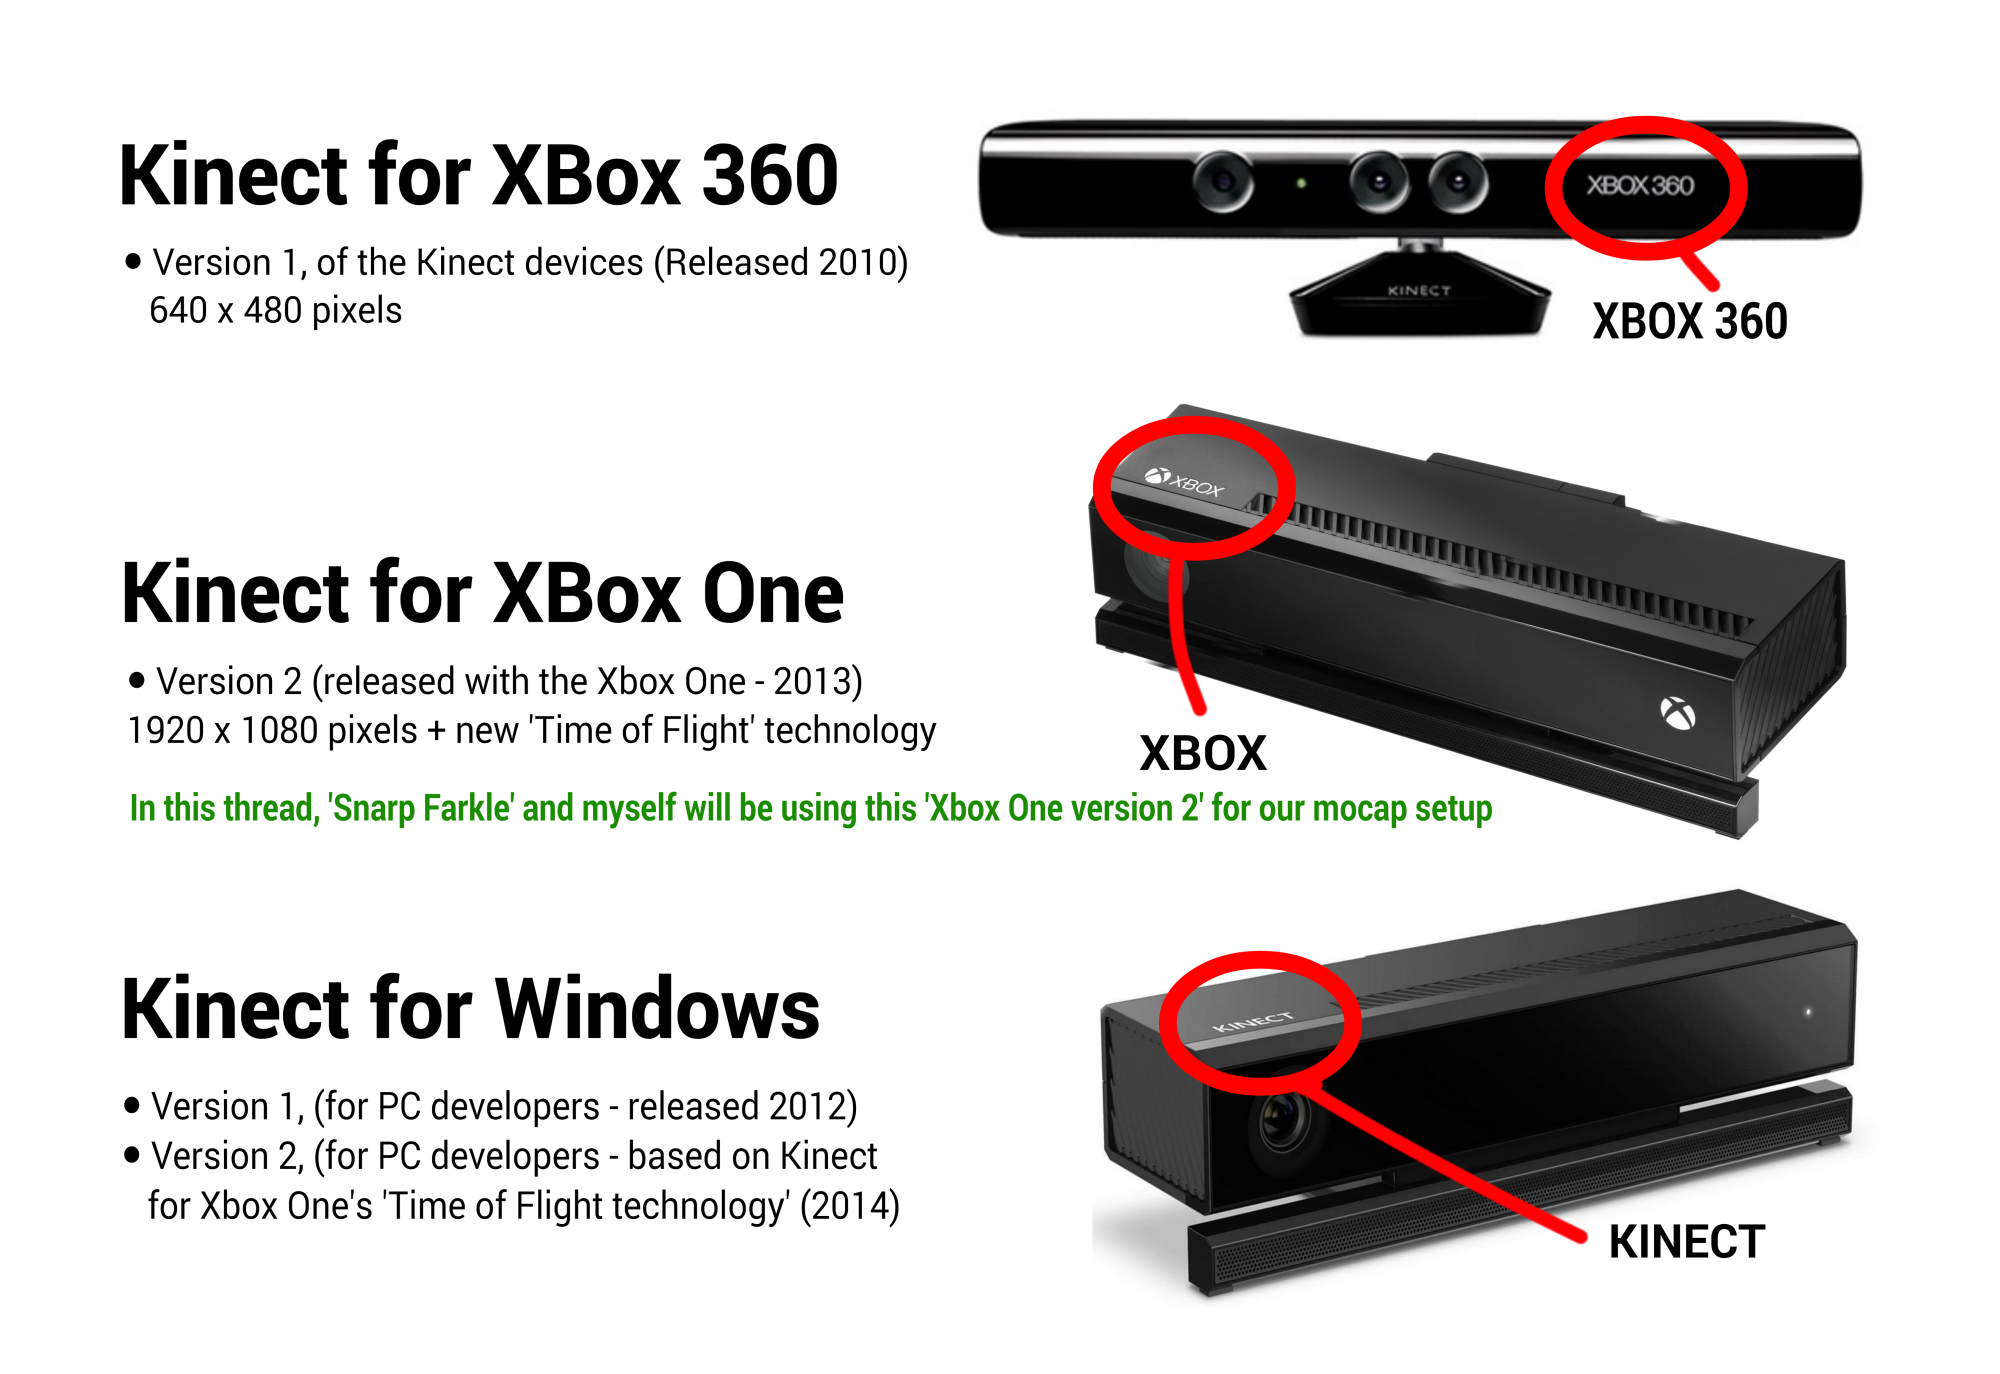 how much is a kinect for xbox 360